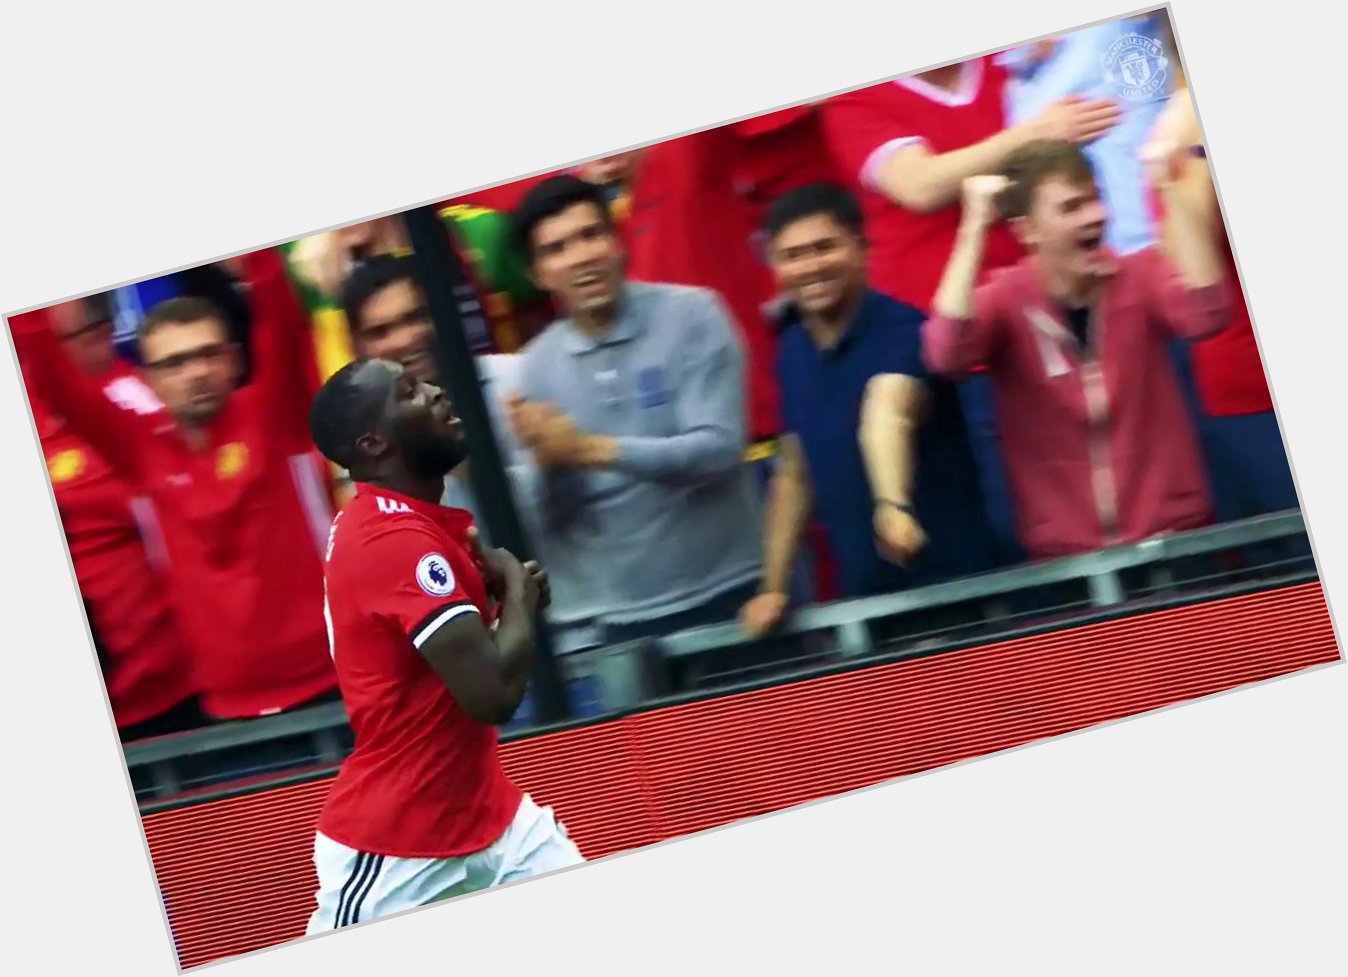 Happy birthday to Romelu Lukaku! Superb striker just not the right fit for us. 